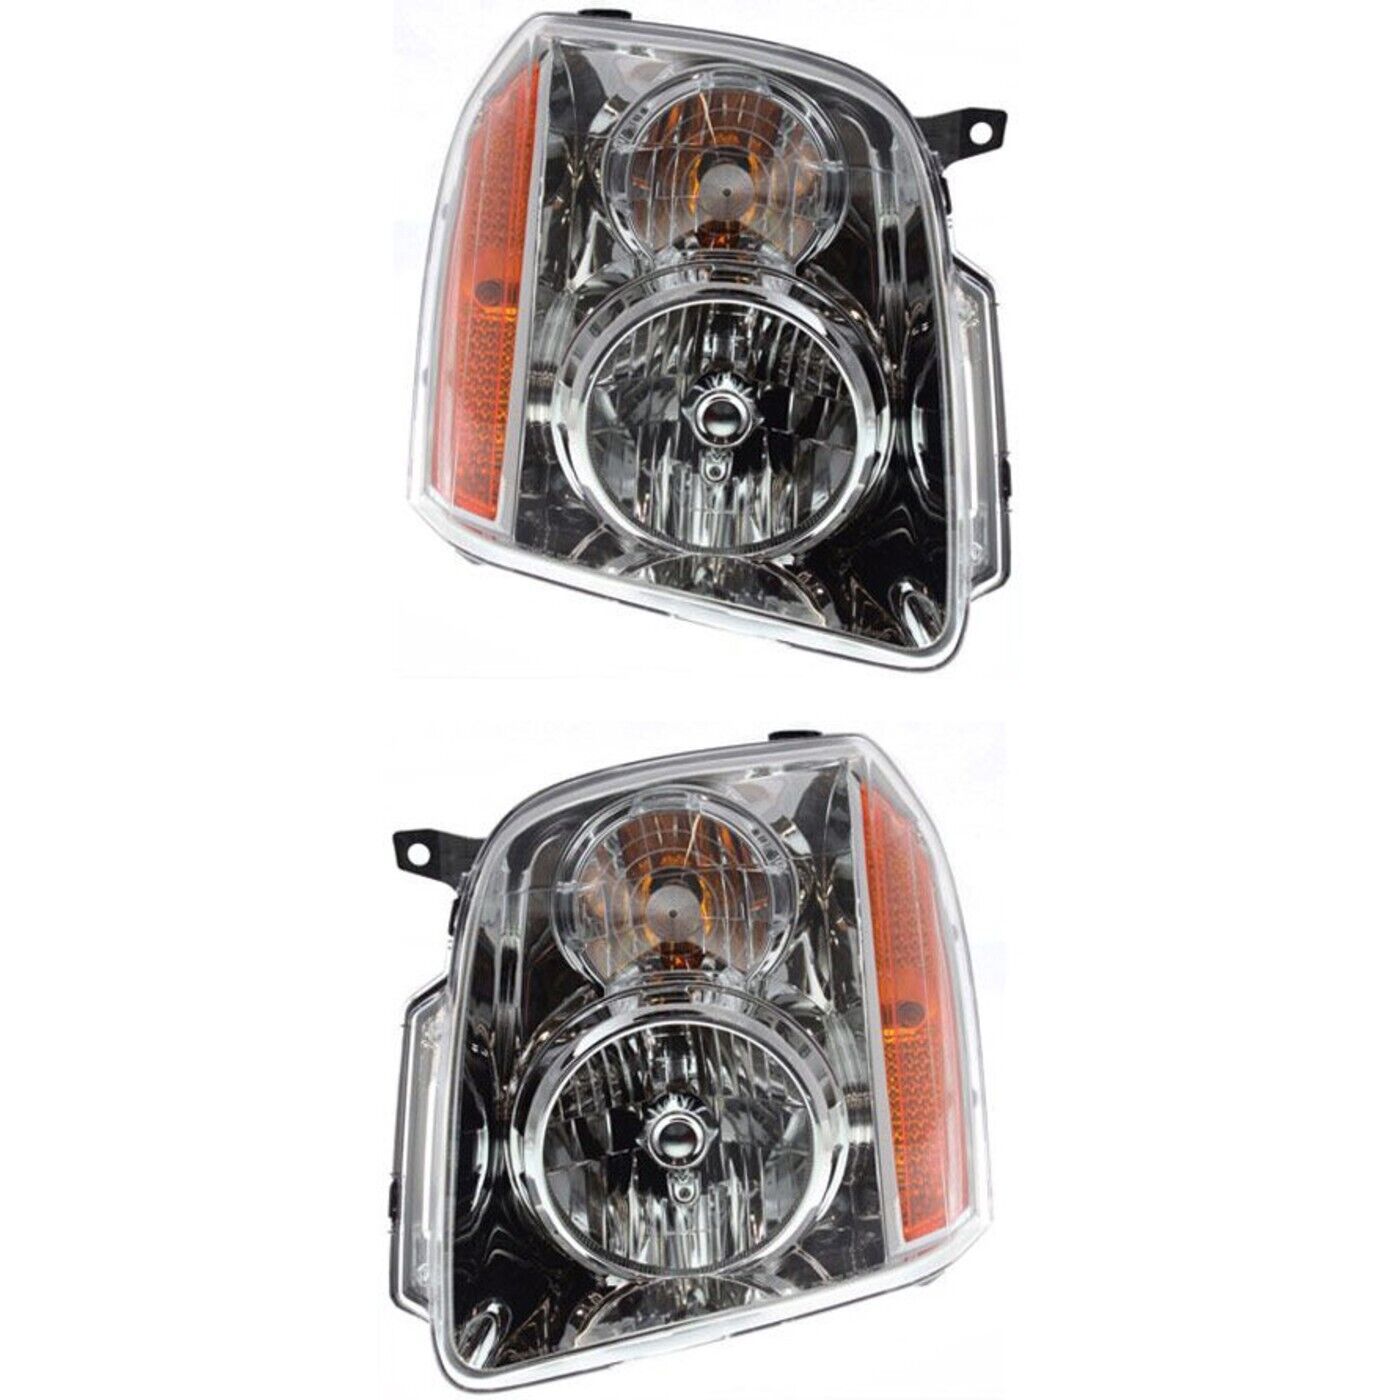 Headlight Assembly Set For 2007-2014 GMC Yukon XL 1500 Left and Right With Bulb